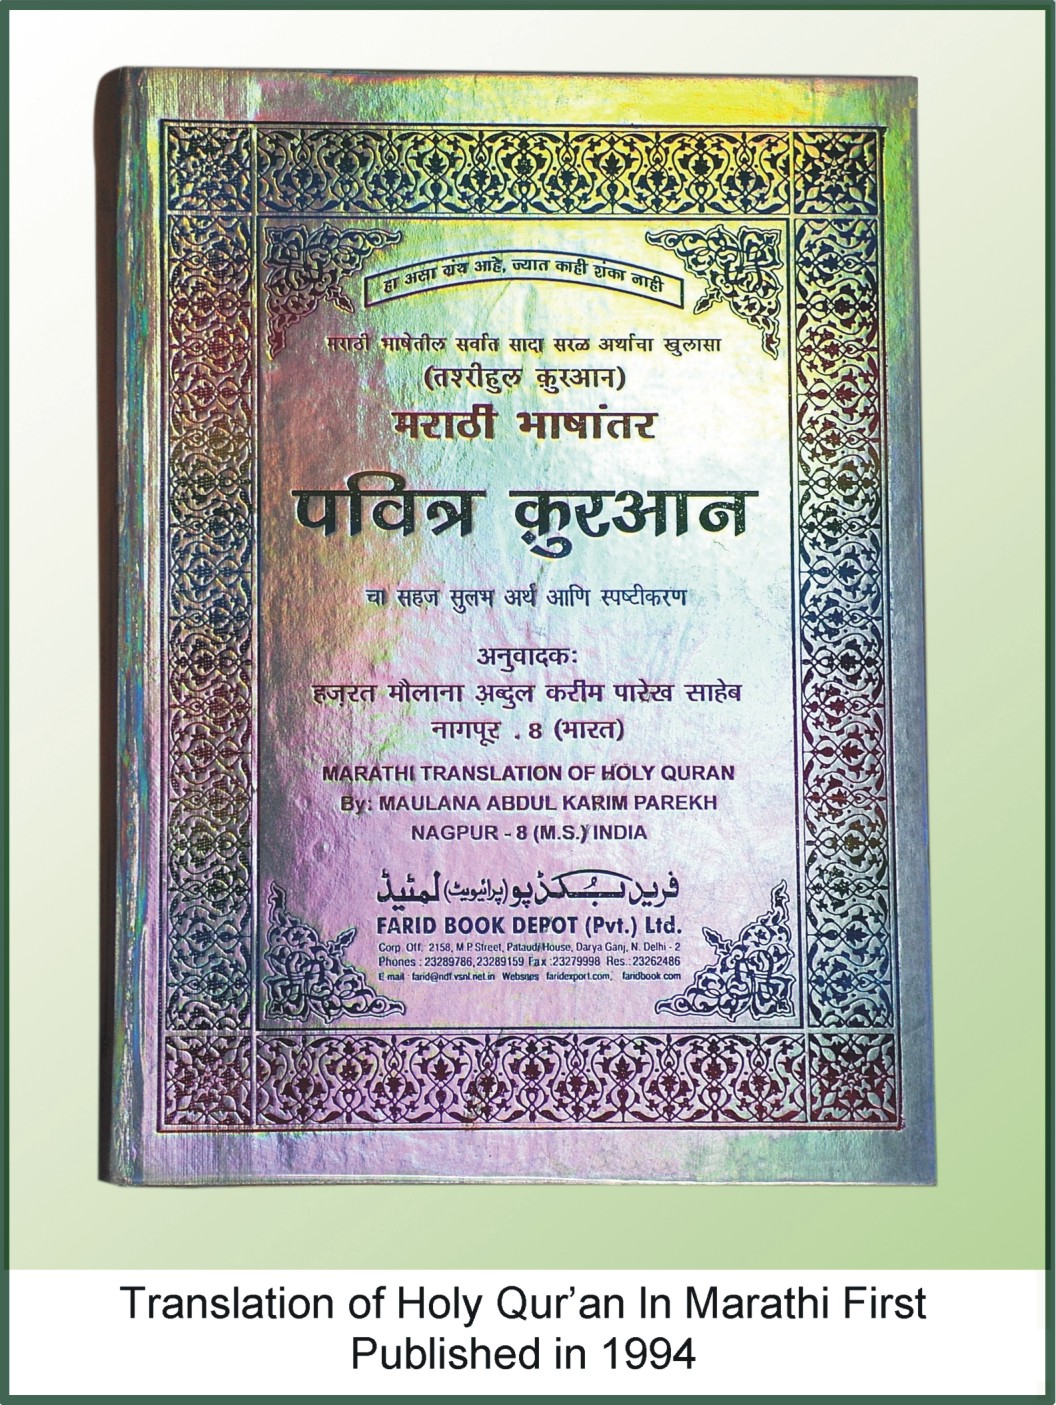 Translation of Holy Qur'an (Marathi) First Published in 1994